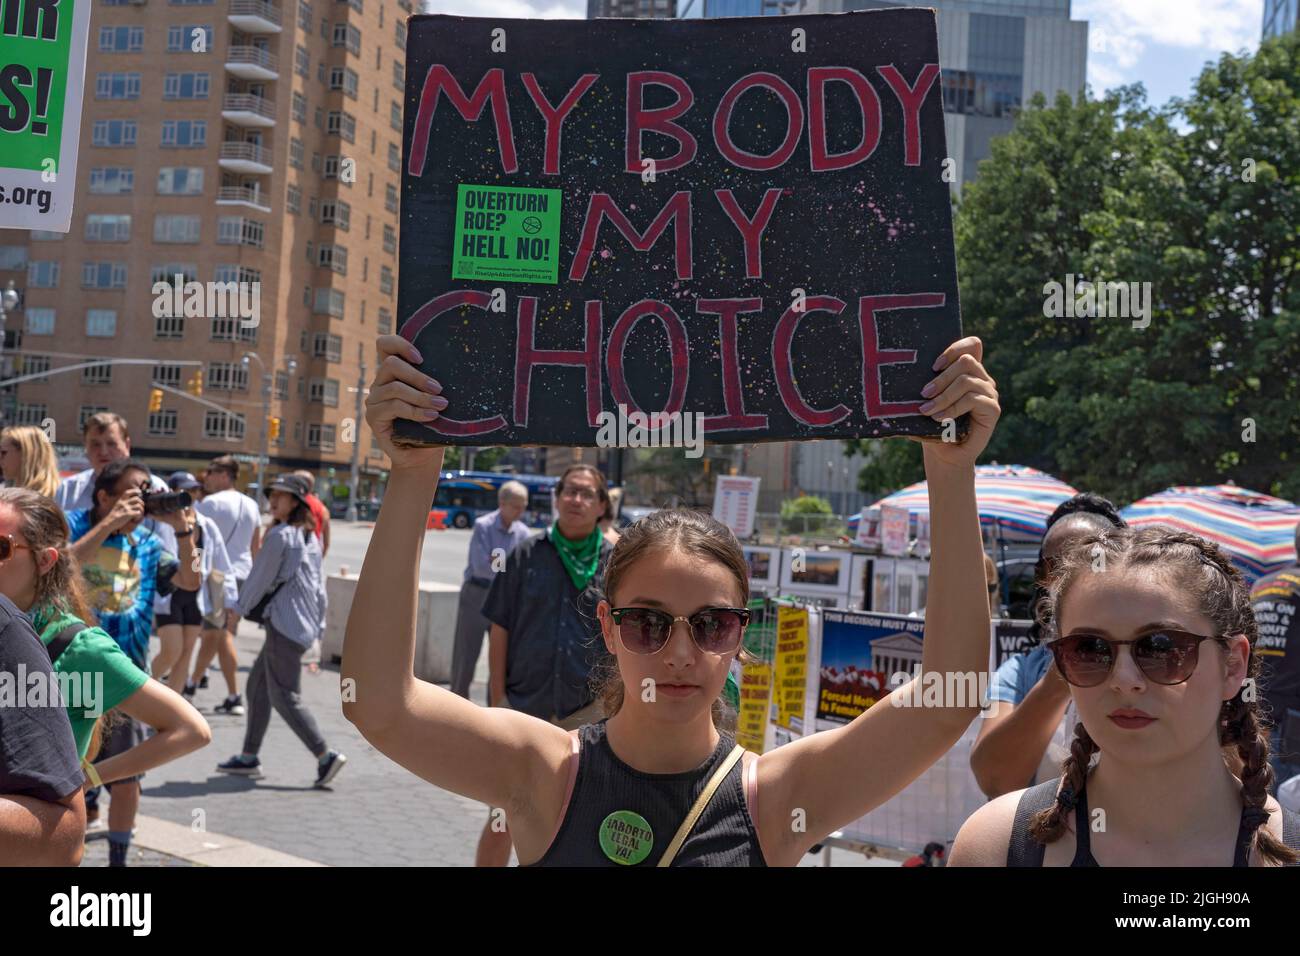 New York, United States. 09th July, 2022. A woman holds a sign that says 'My Body My Choice' during a pro-abortion rights protest at Columbus Circle in front of the Trump International Hotel. Pro-abortion rights demonstrators in 30 cities across the U.S. took part in a national day of protest to protest the Supreme Court's decision to overturn Roe v Wade organized by the Rise Up 4 Abortion Rights group. (Photo by Ron Adar/SOPA Images/Sipa USA) Credit: Sipa USA/Alamy Live News Stock Photo